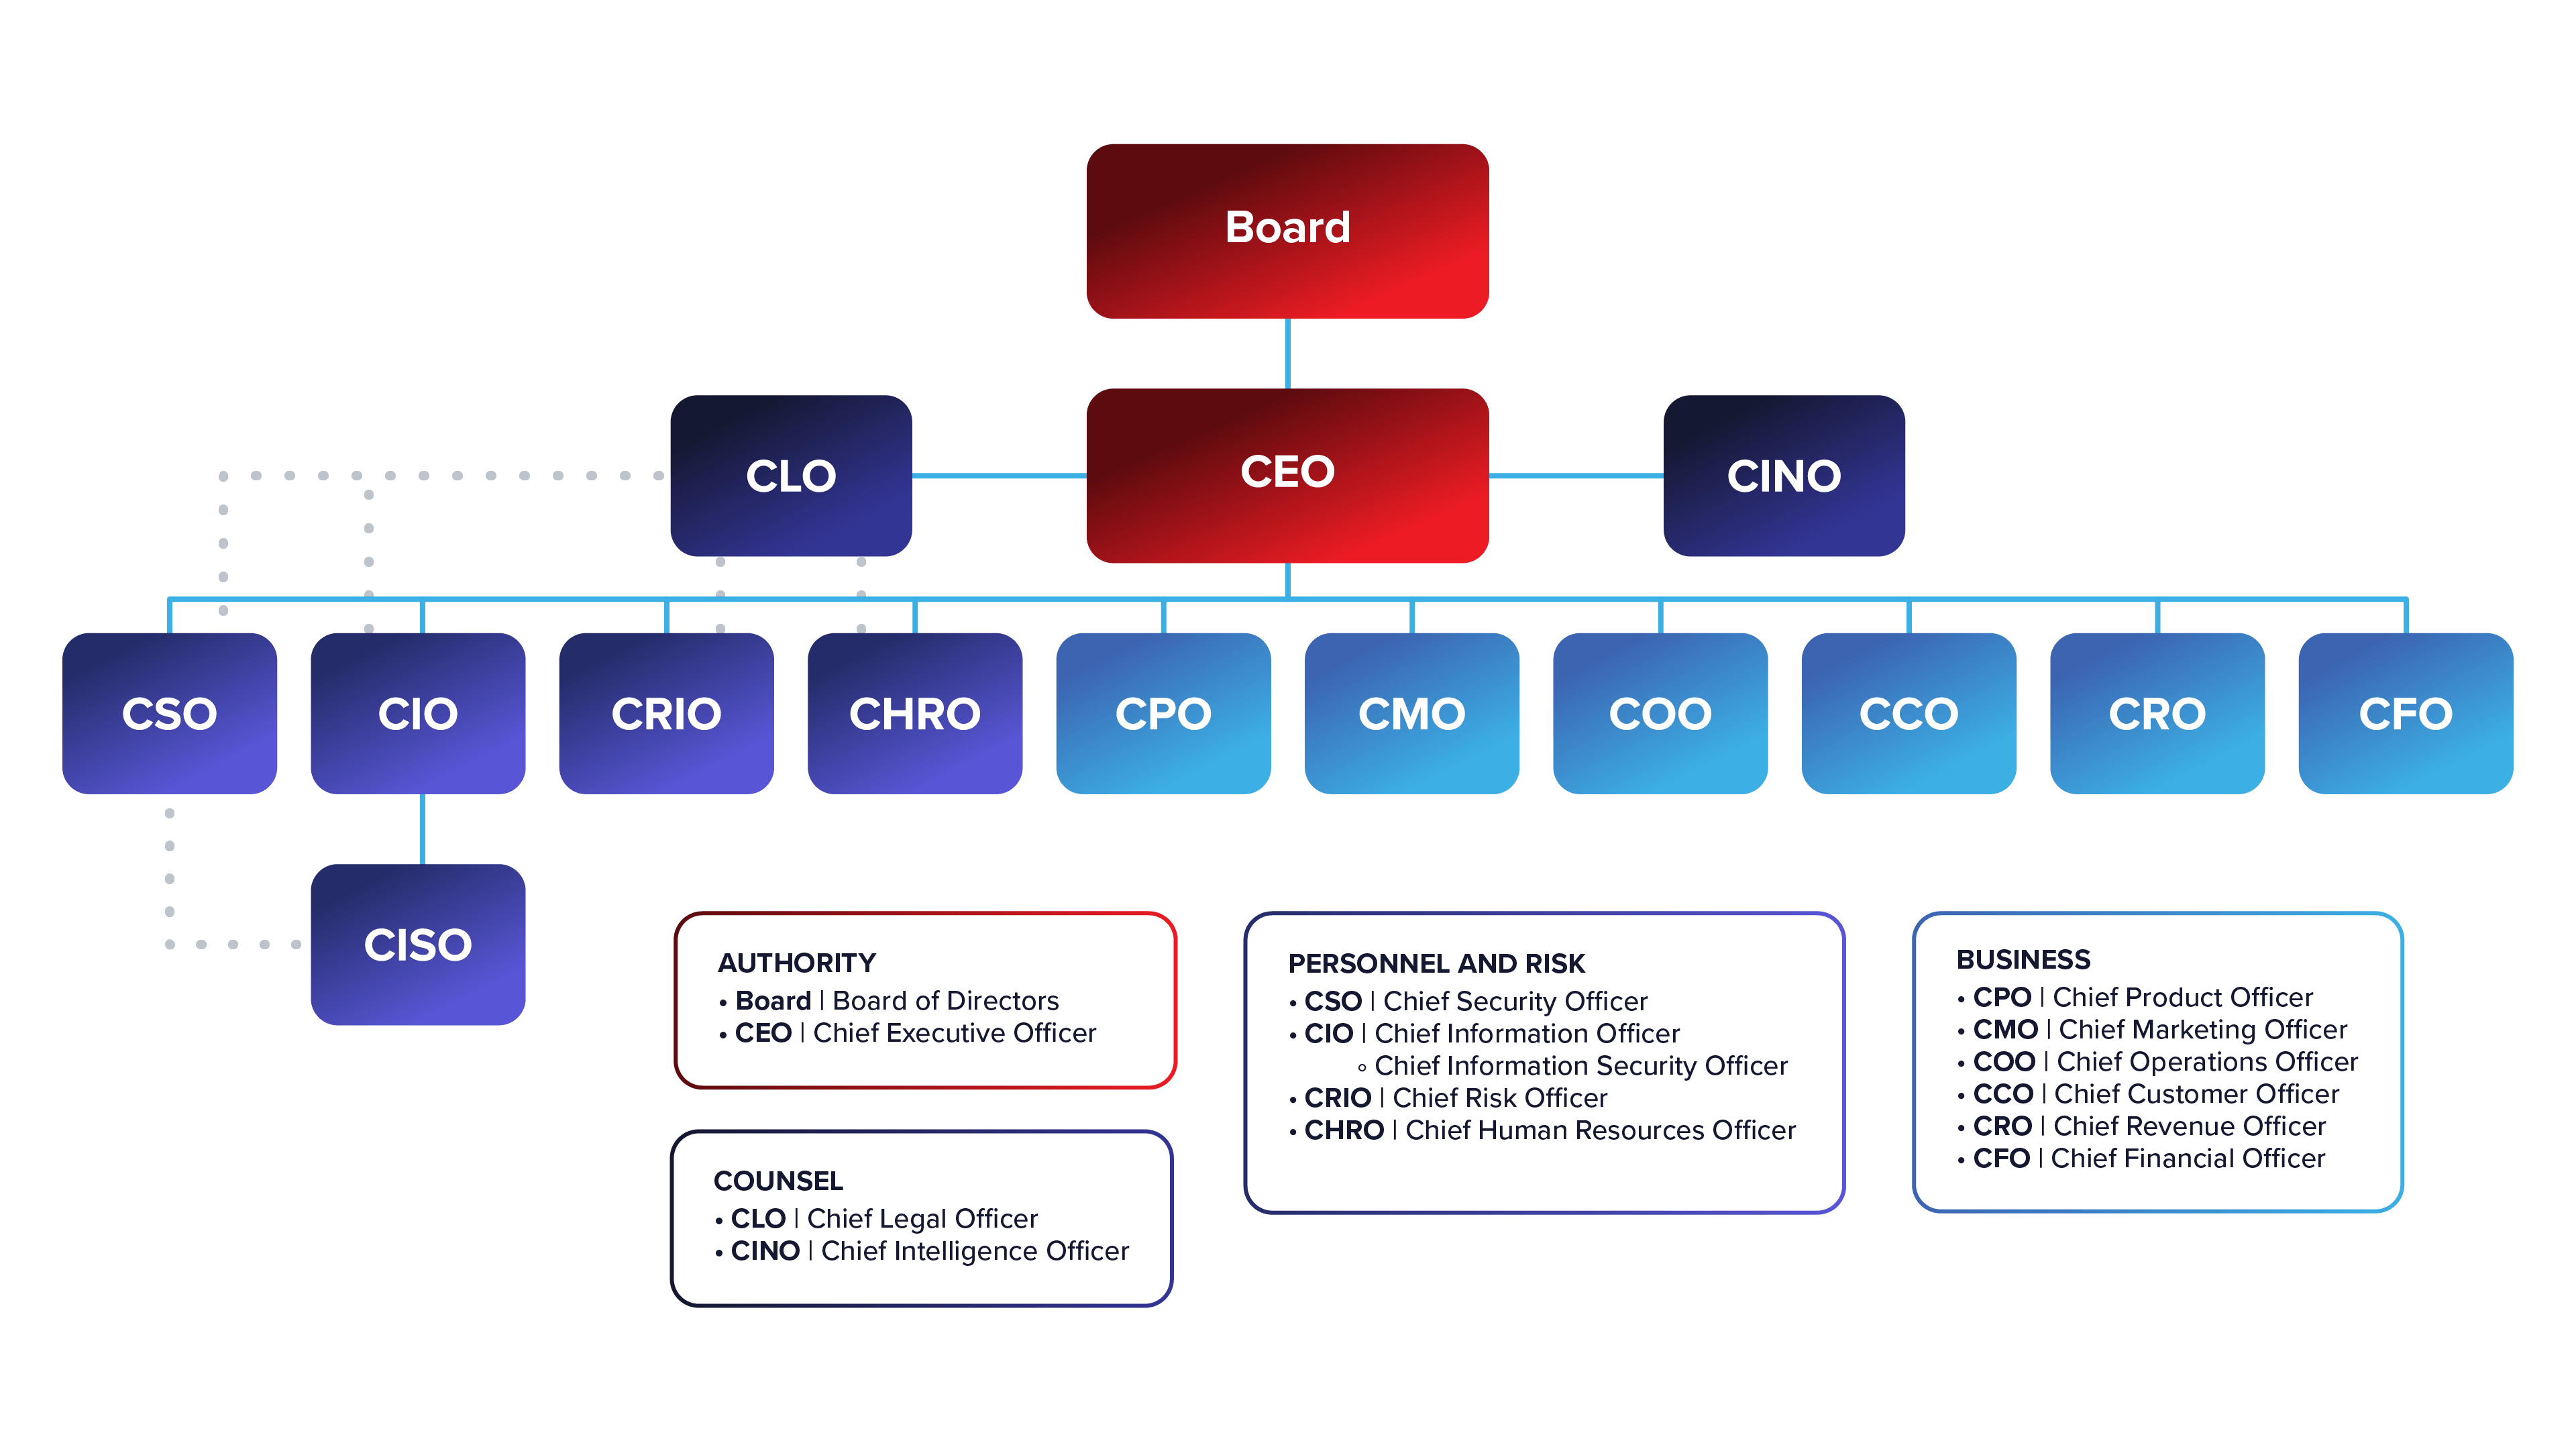 Figure 3: Example of CINO in broader organizational structure (Source: Nash, US Cybersecurity Magazine)